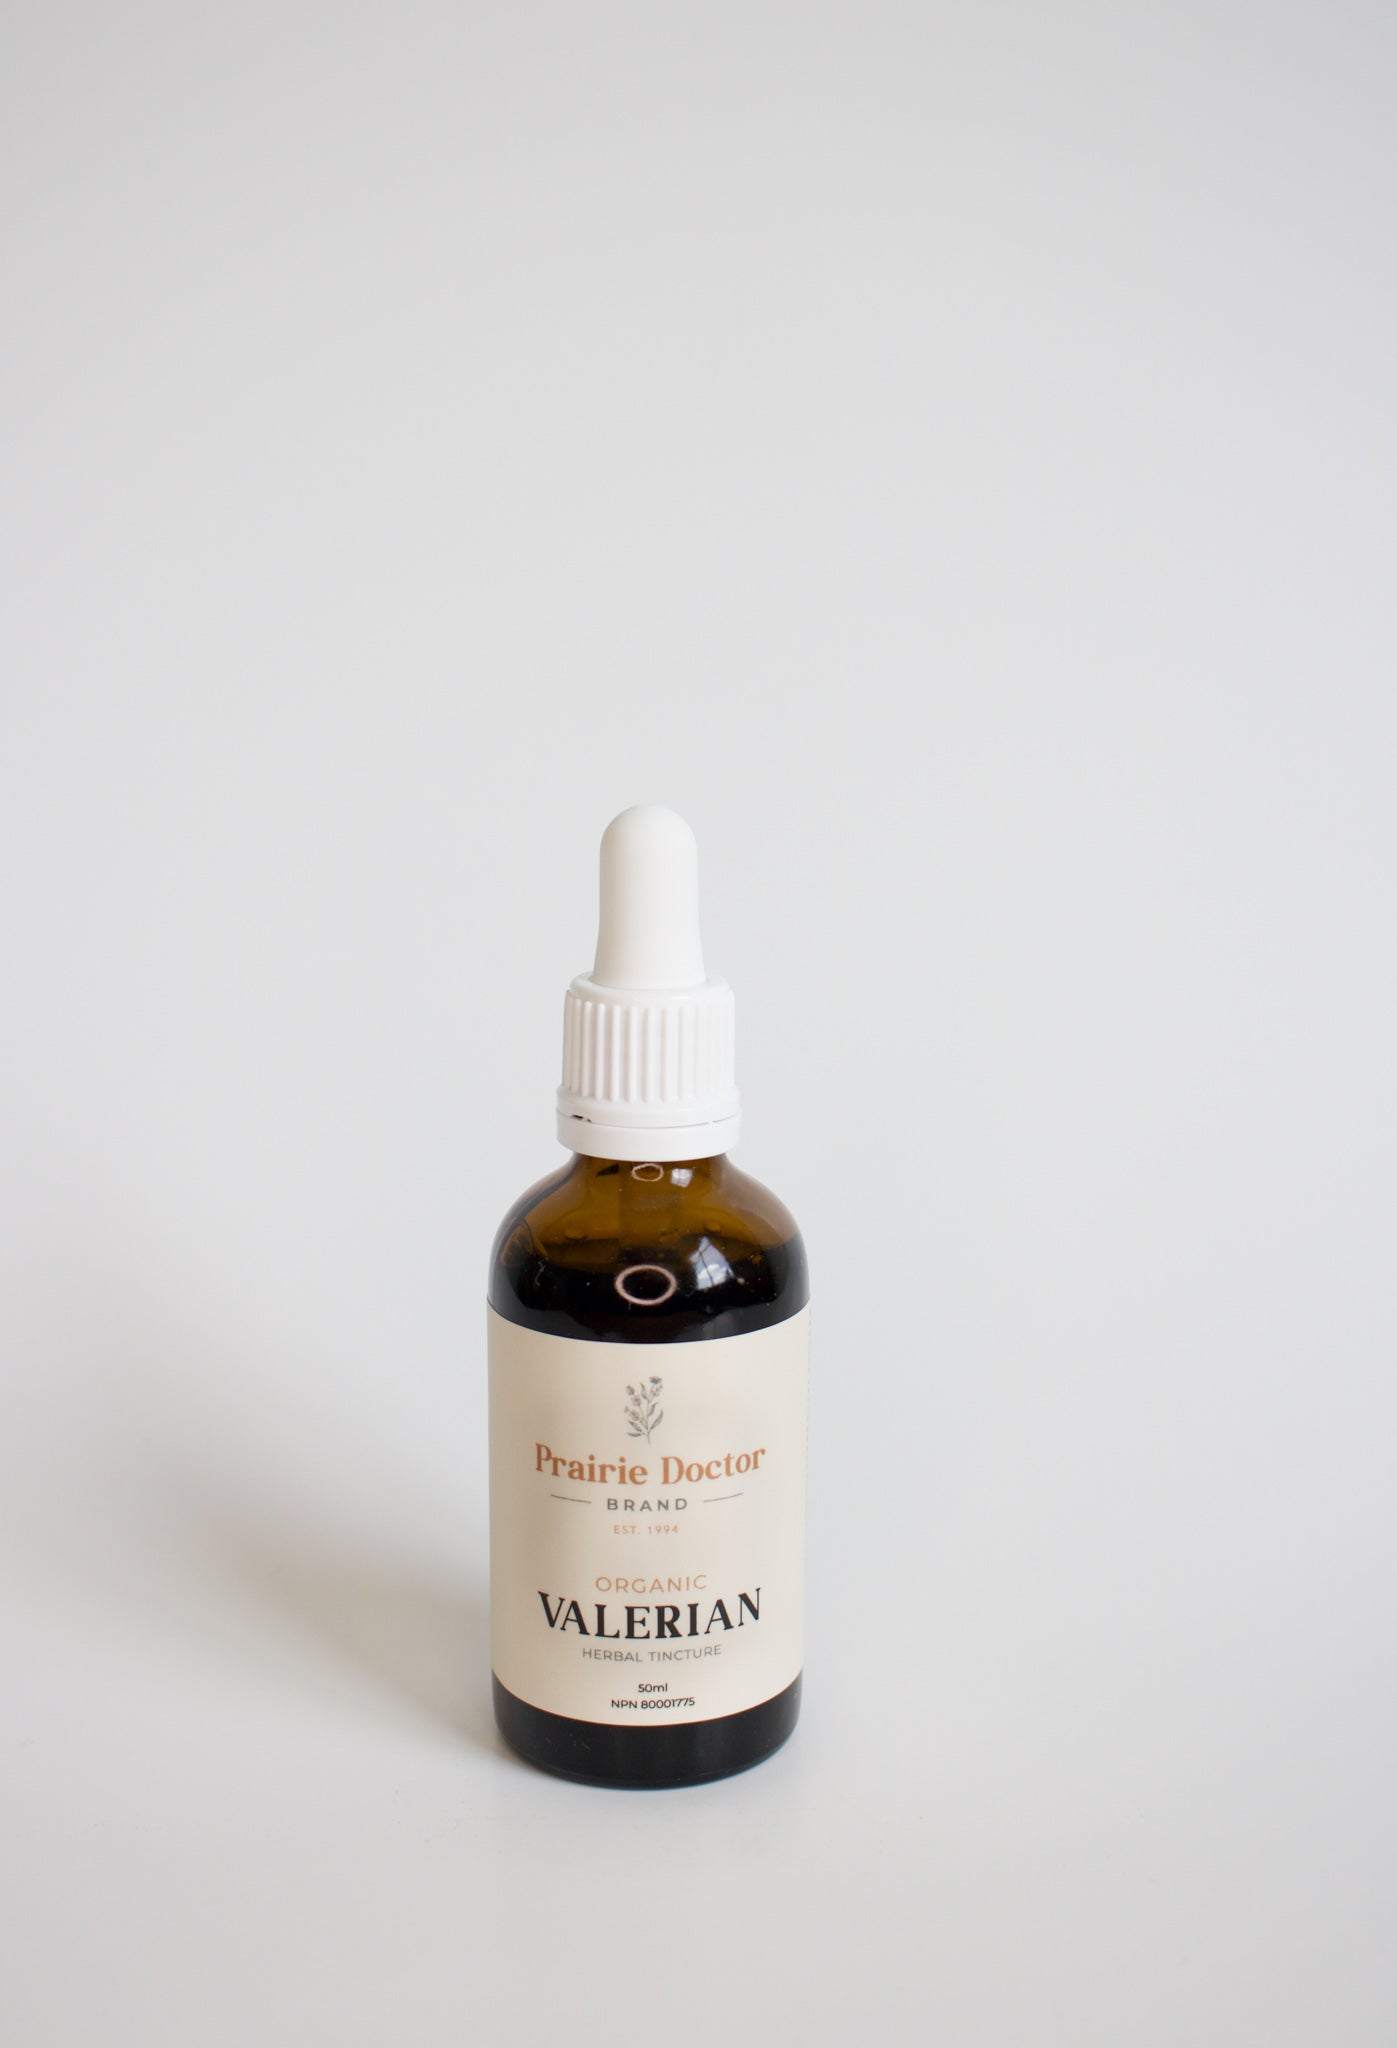 Our organic Valerian herbal tincture can be used as a mild daytime sedative for the relief of nervousness, edginess, jitteriness, and restlessness.